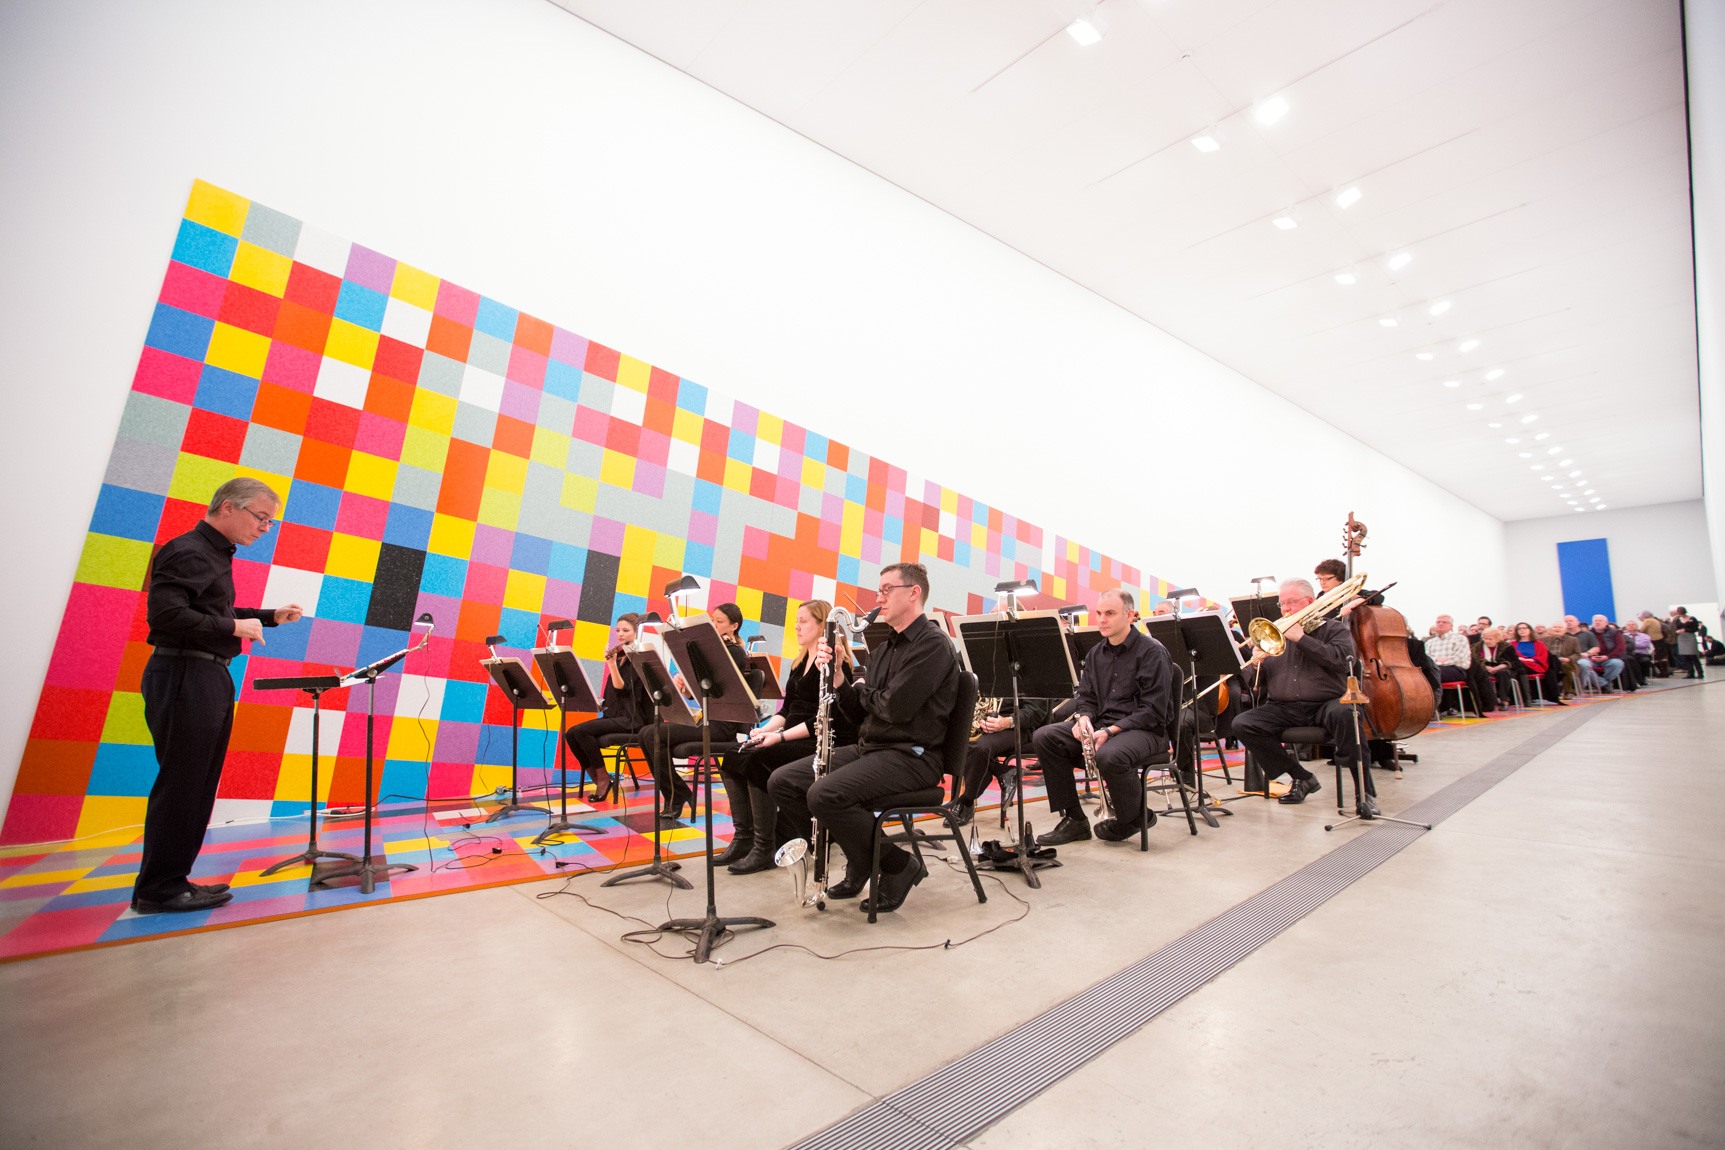 David Robertson conducts symphony members in the Main Gallery, framed by David Scanavino's installation "Candy Crush."